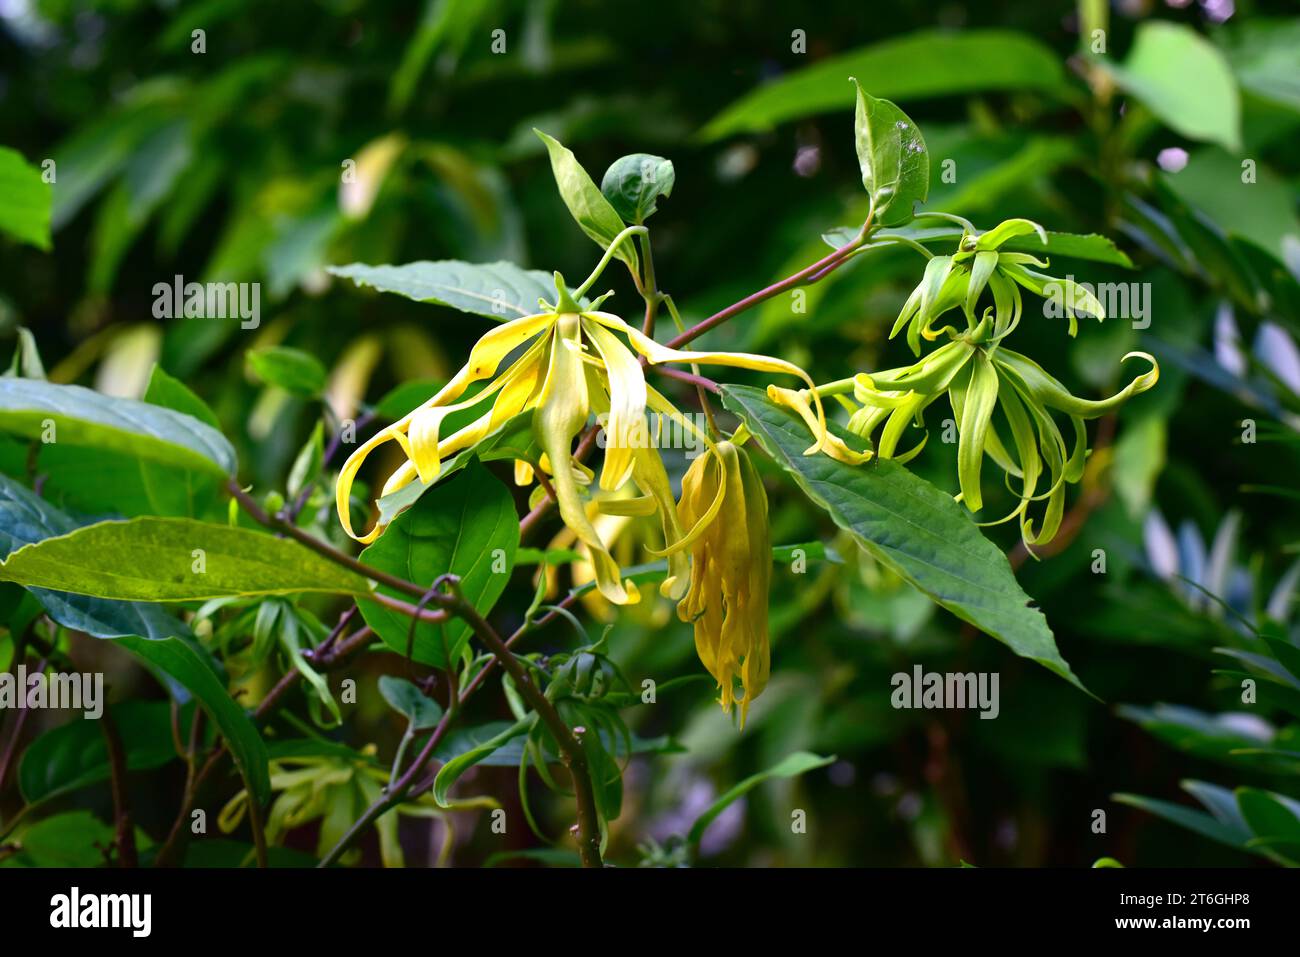 Cananga tree (Cananga odorata) is an evergreen tree native to tropical Asia. Its flowers named ylang-ylang are highly appreciated in perfumery. This p Stock Photo